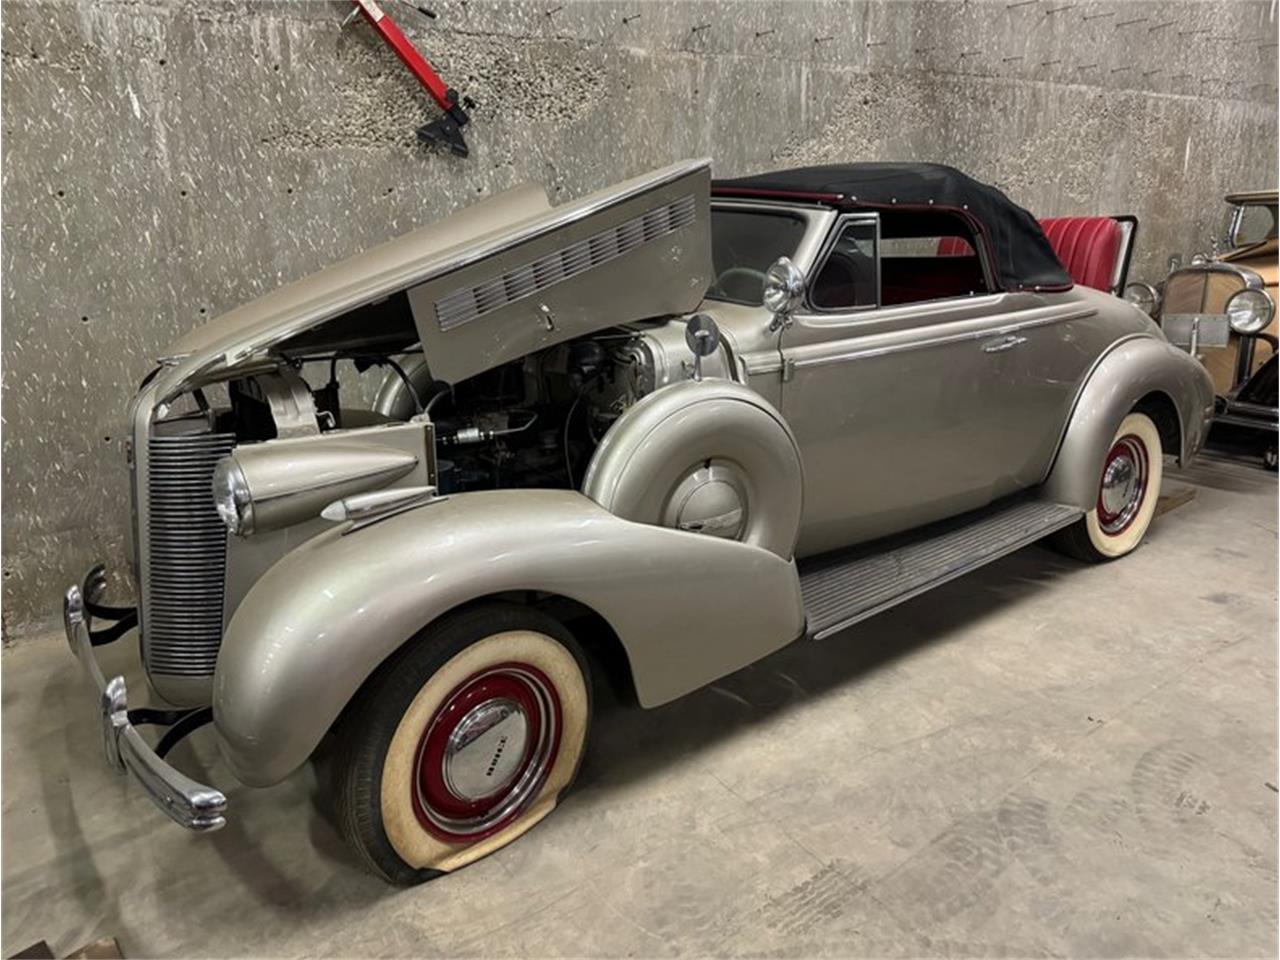 For Sale at Auction: 1937 Buick Special in Concord, North Carolina